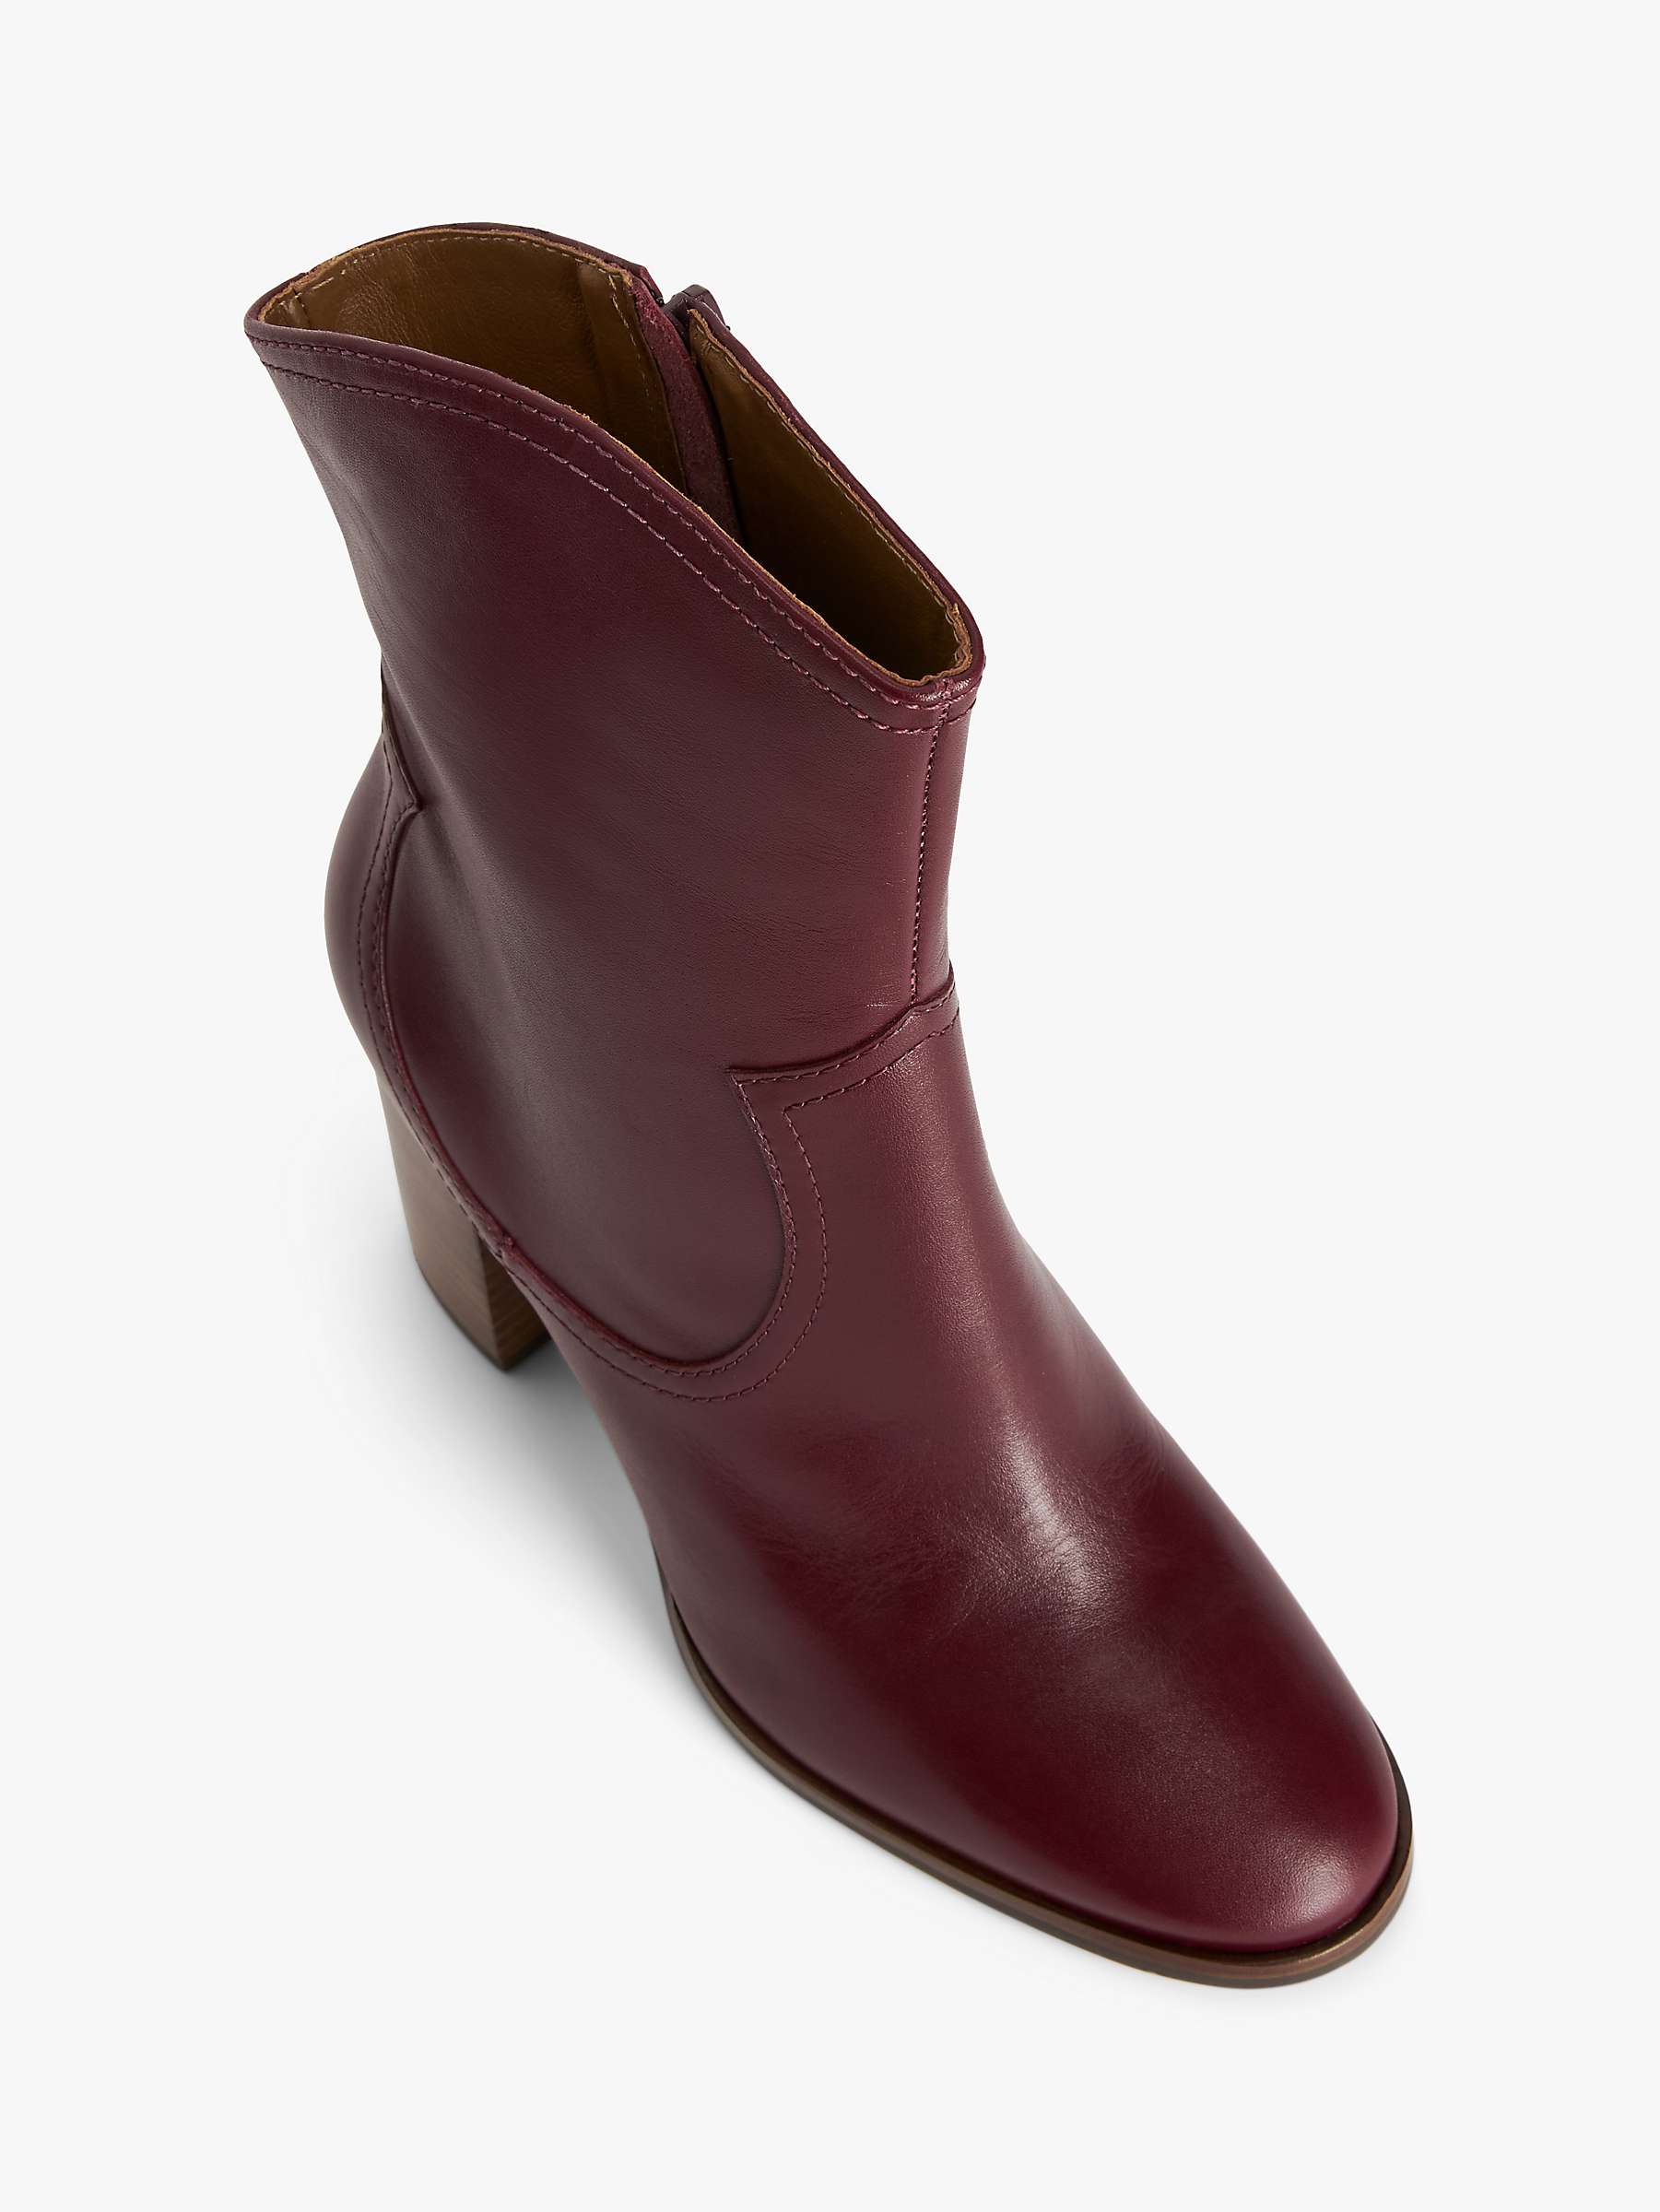 Buy AND/OR Otto Leather Dressy Block Heel Ankle Boots, Berry Online at johnlewis.com